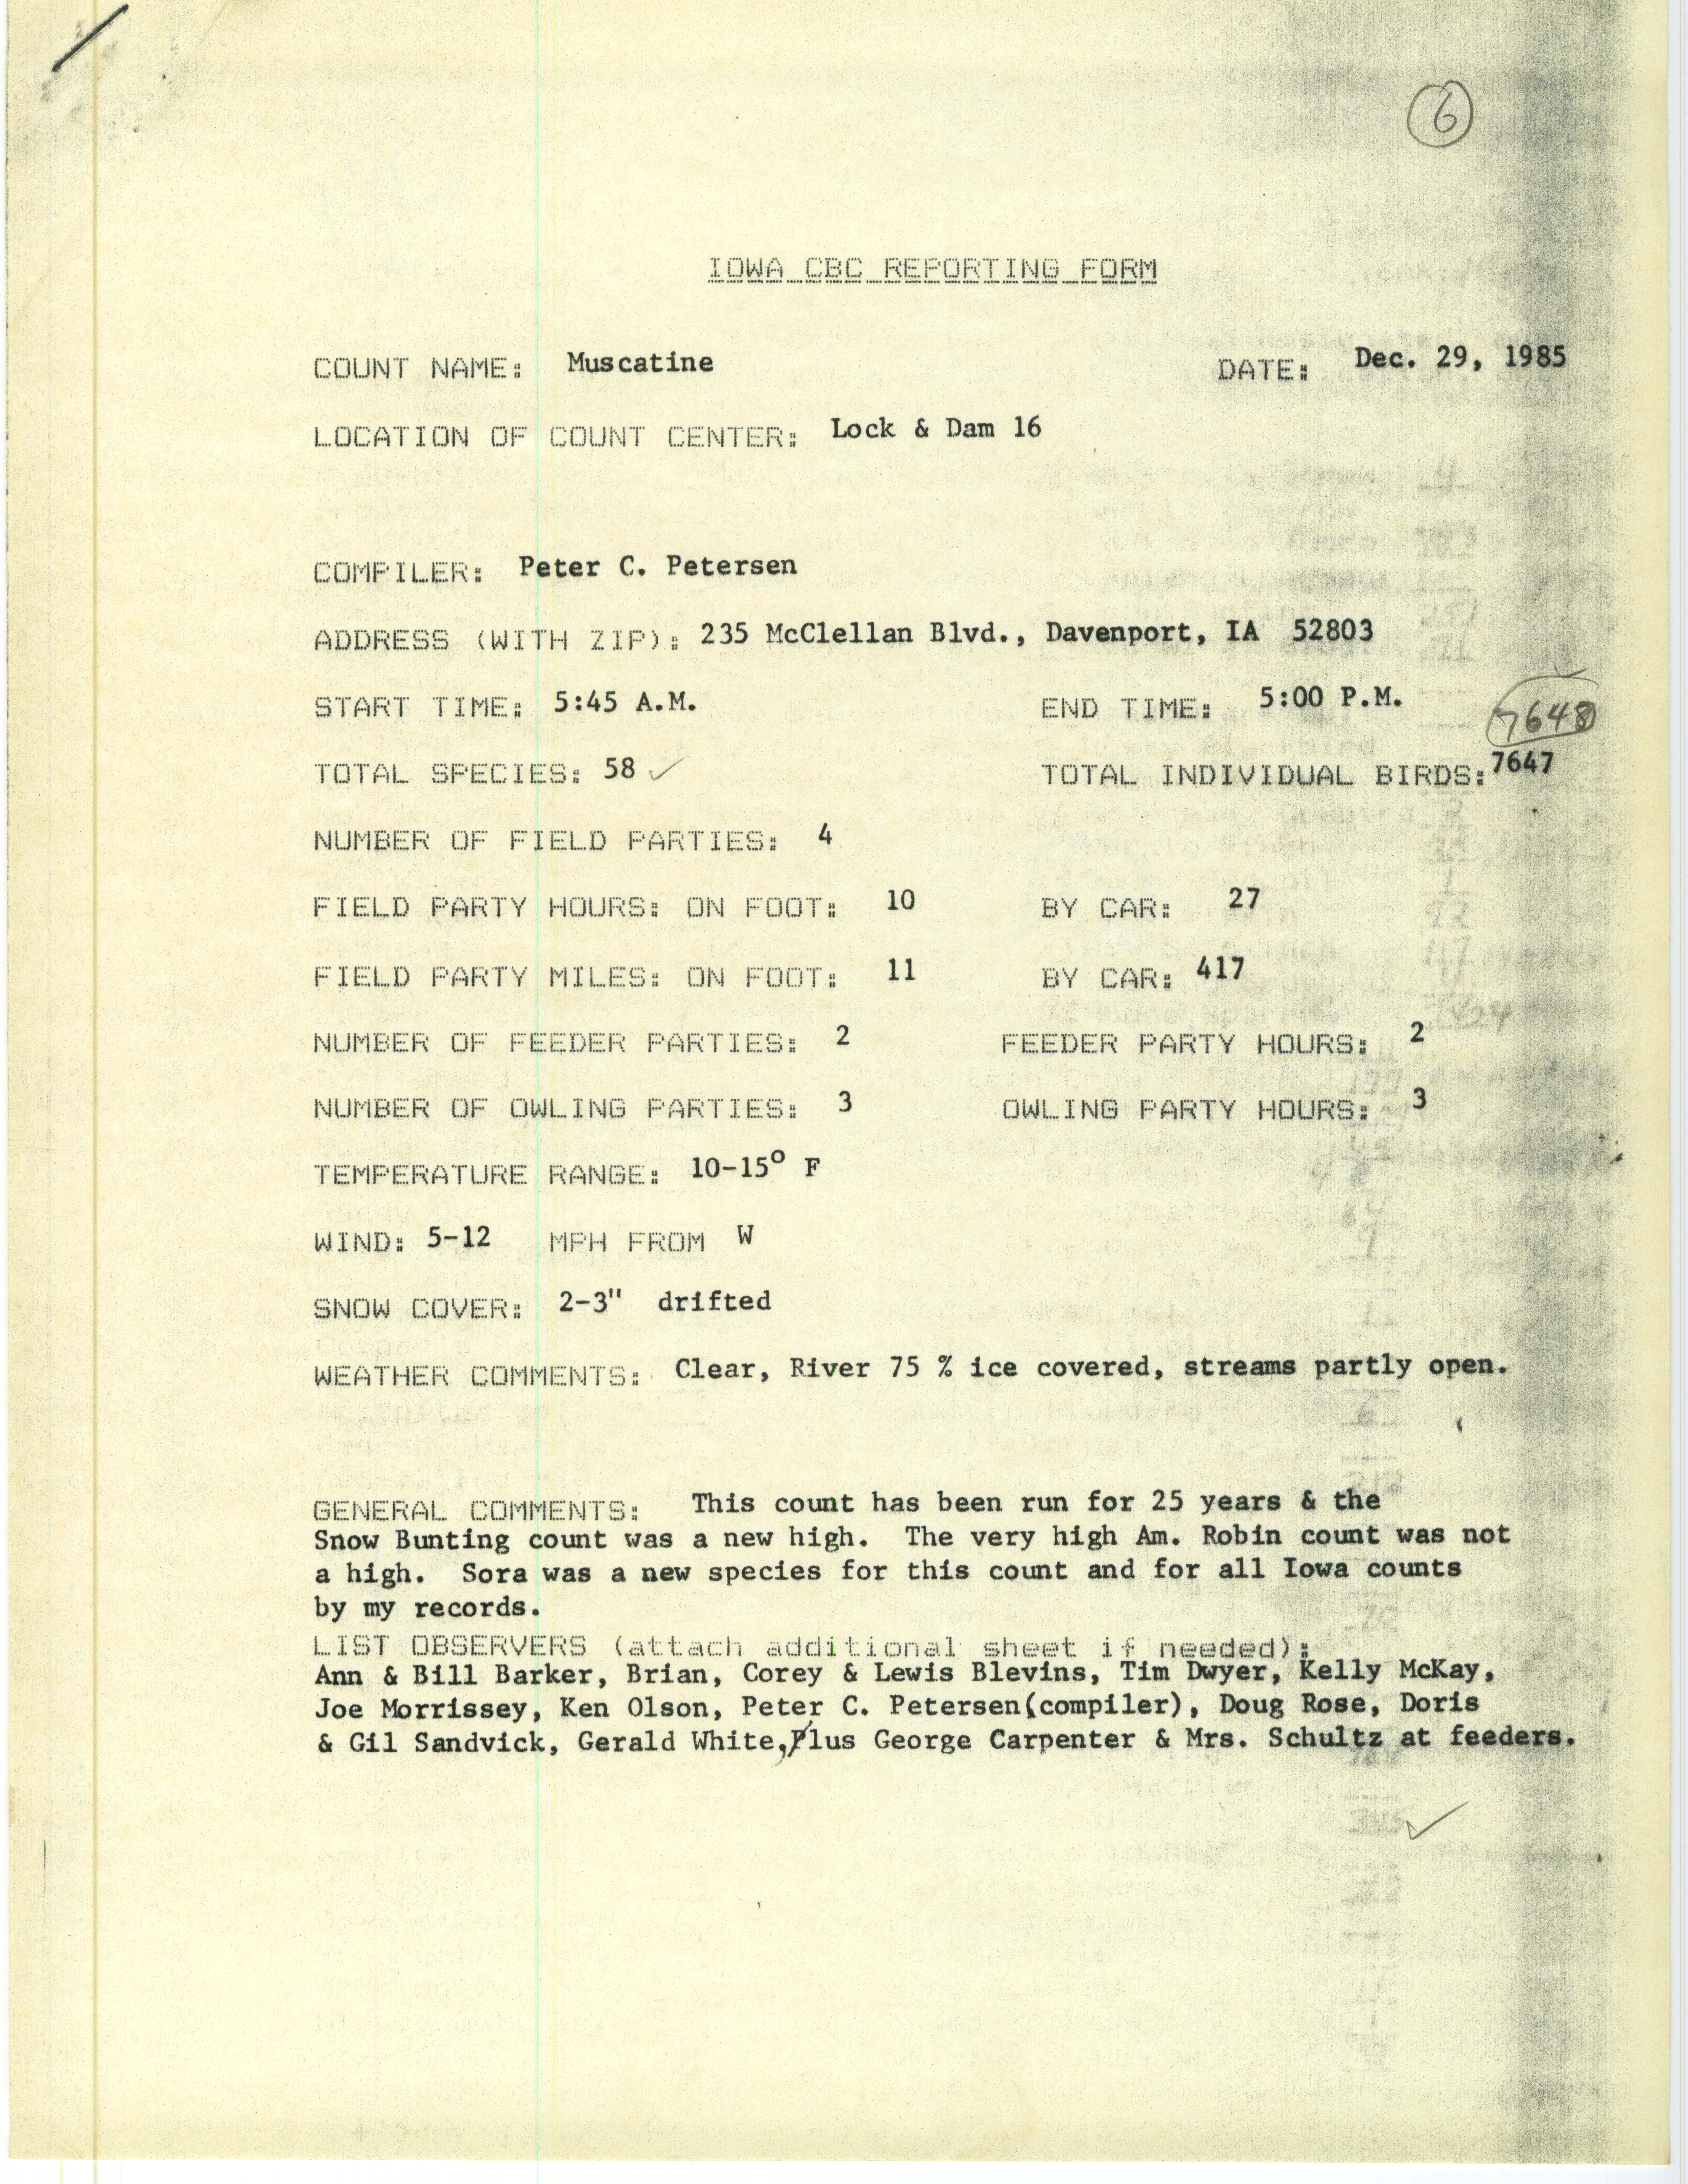 Iowa CBC reporting form, Muscatine, December 29, 1985